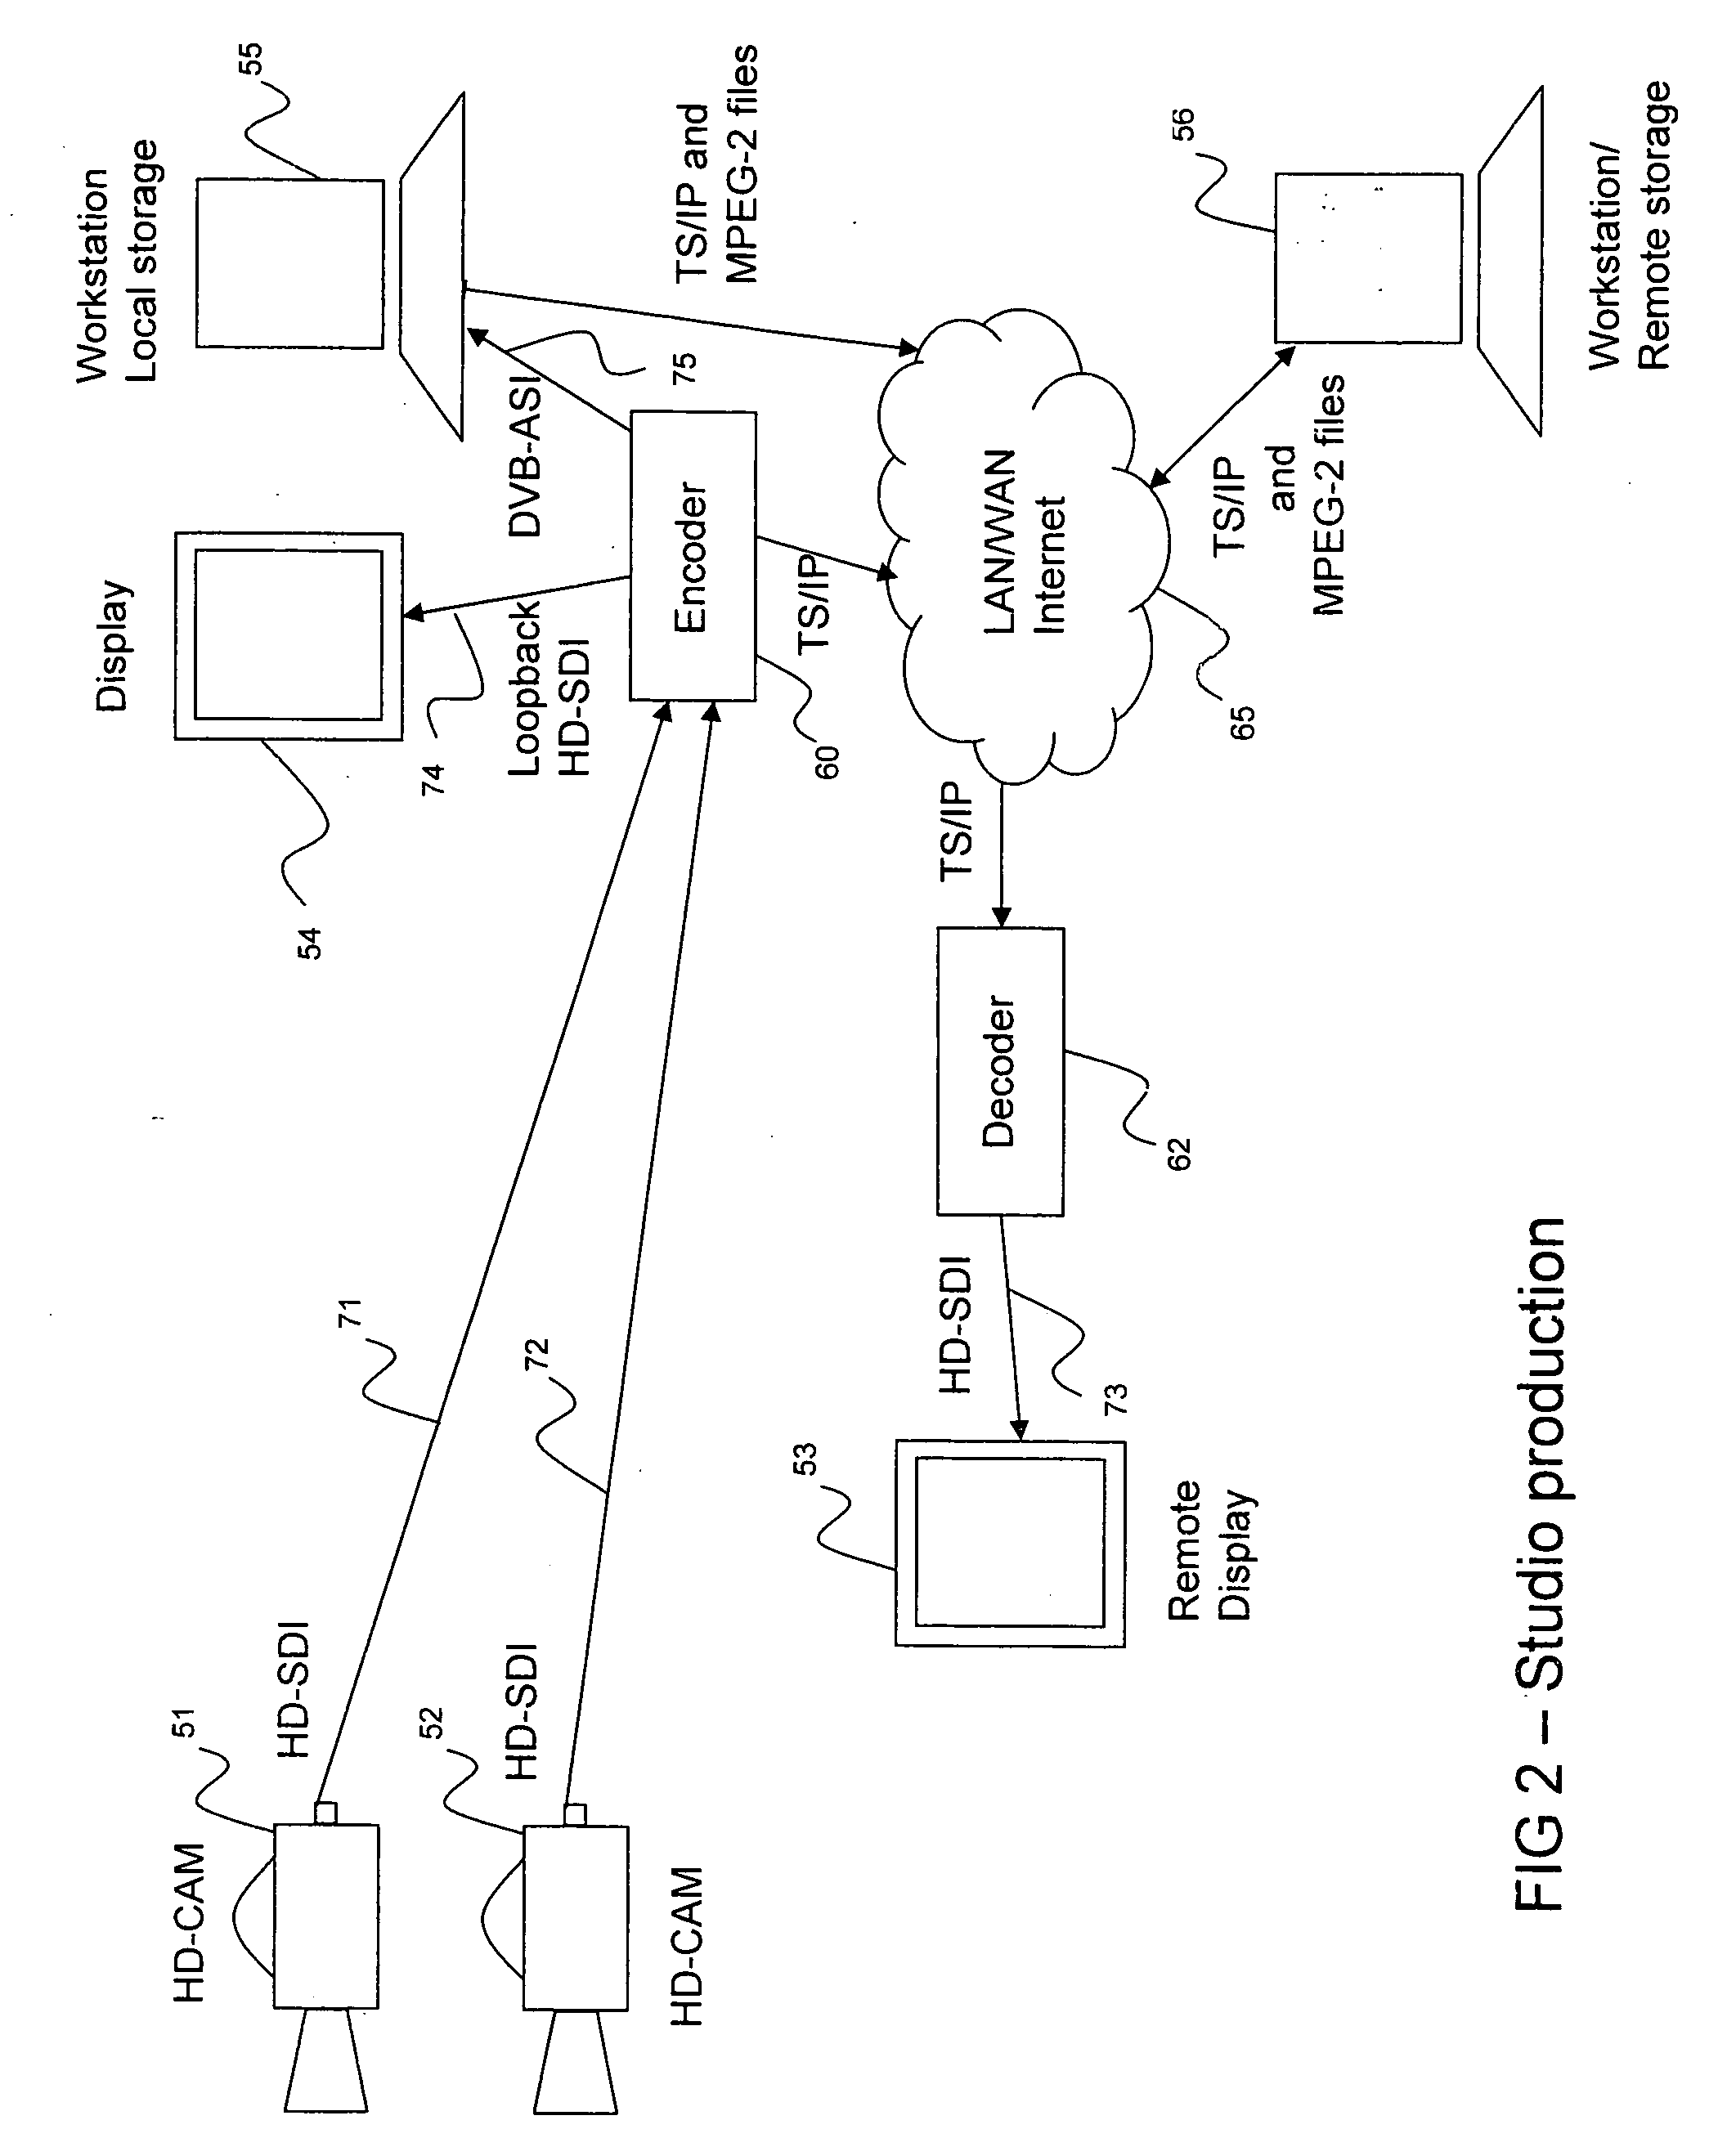 Flexible field based energy efficient multimedia processor architecture and method